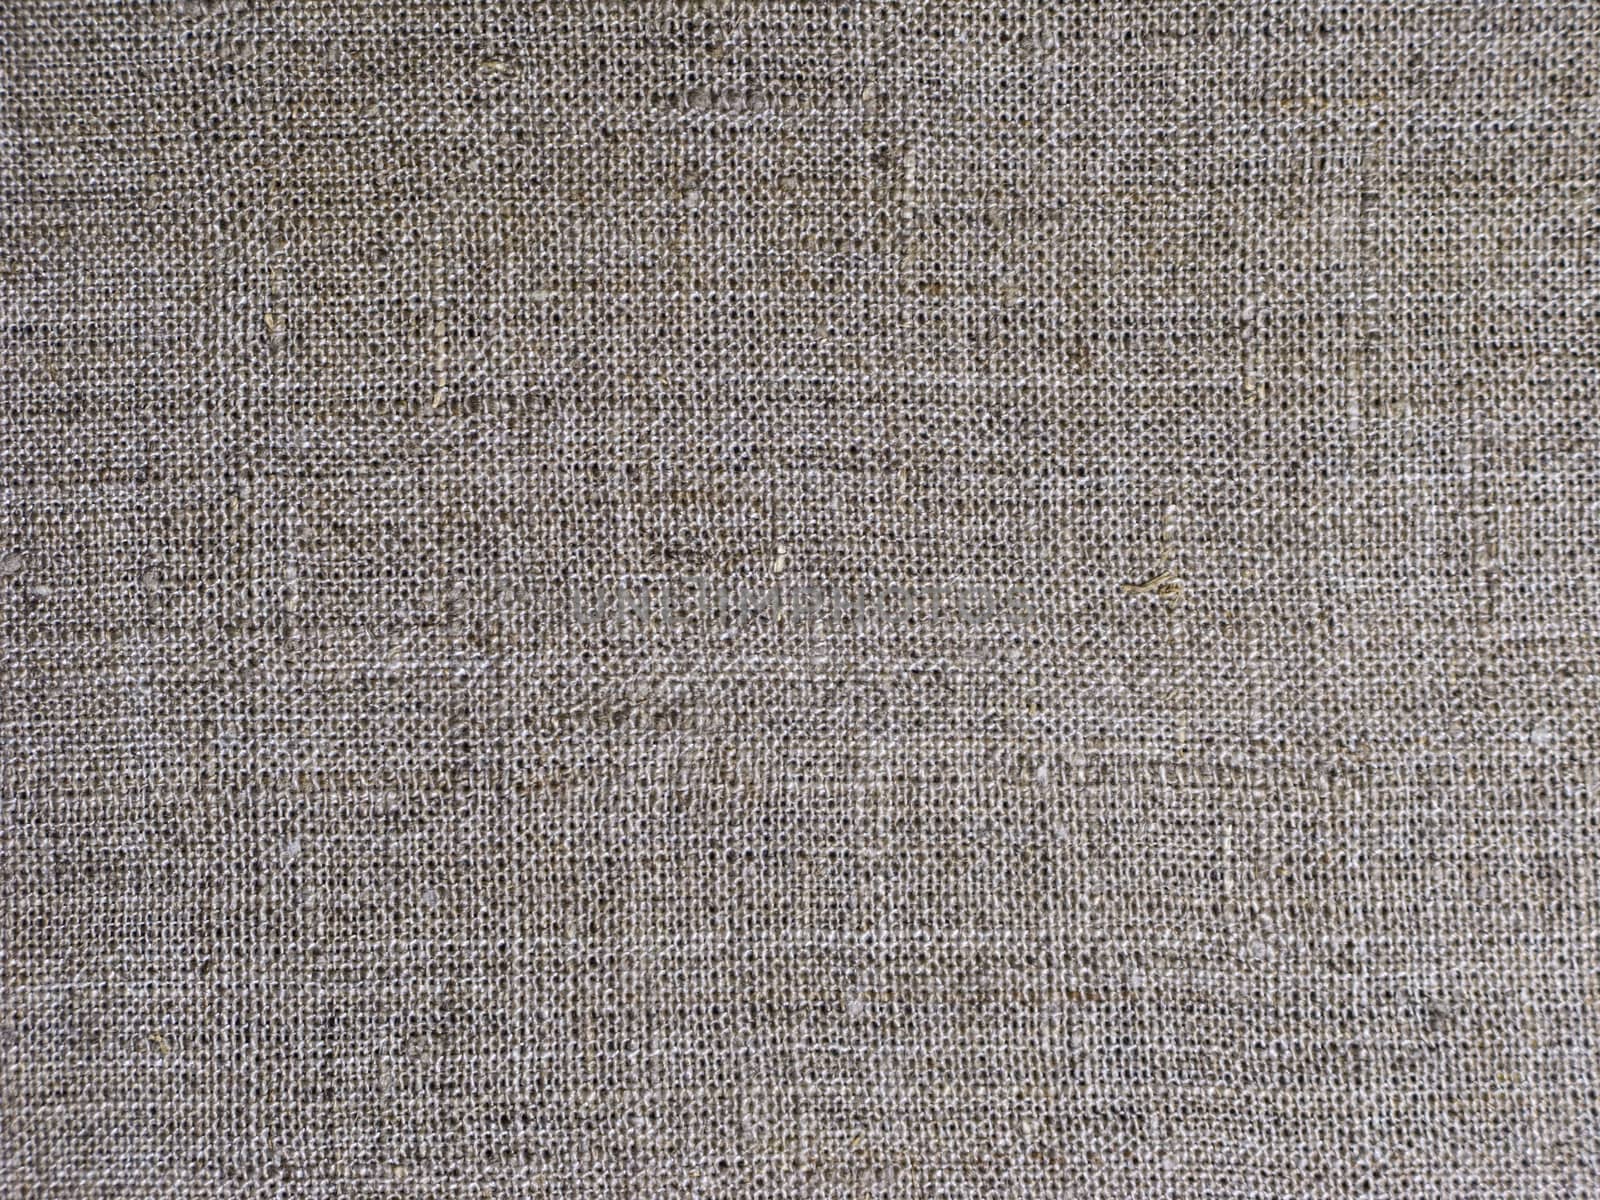 Fragment of gray rough flax fabric texture